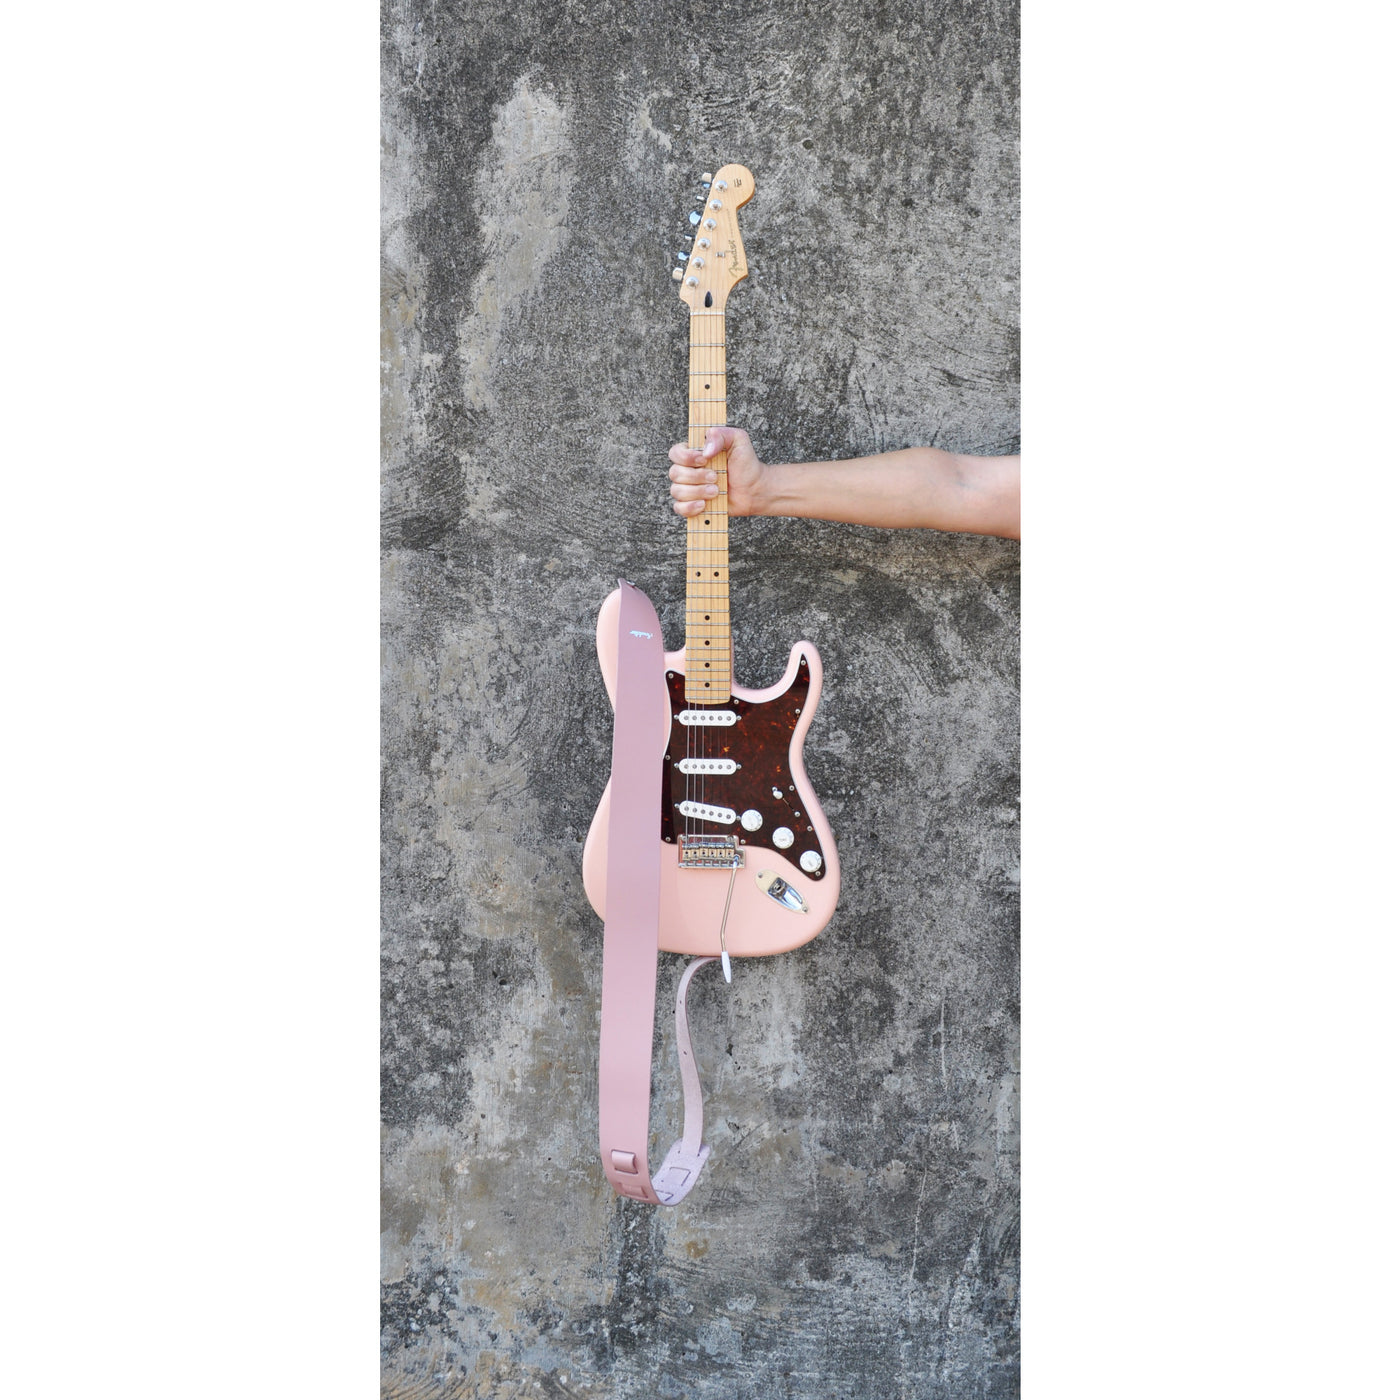 Souldier GS0094DR05BK - Handmade Seatbelt Guitar Strap for Bass, Electric or Acoustic Guitar, 2 Inches Wide and Adjustable Length from 30" to 63"  Made in the USA, Koi